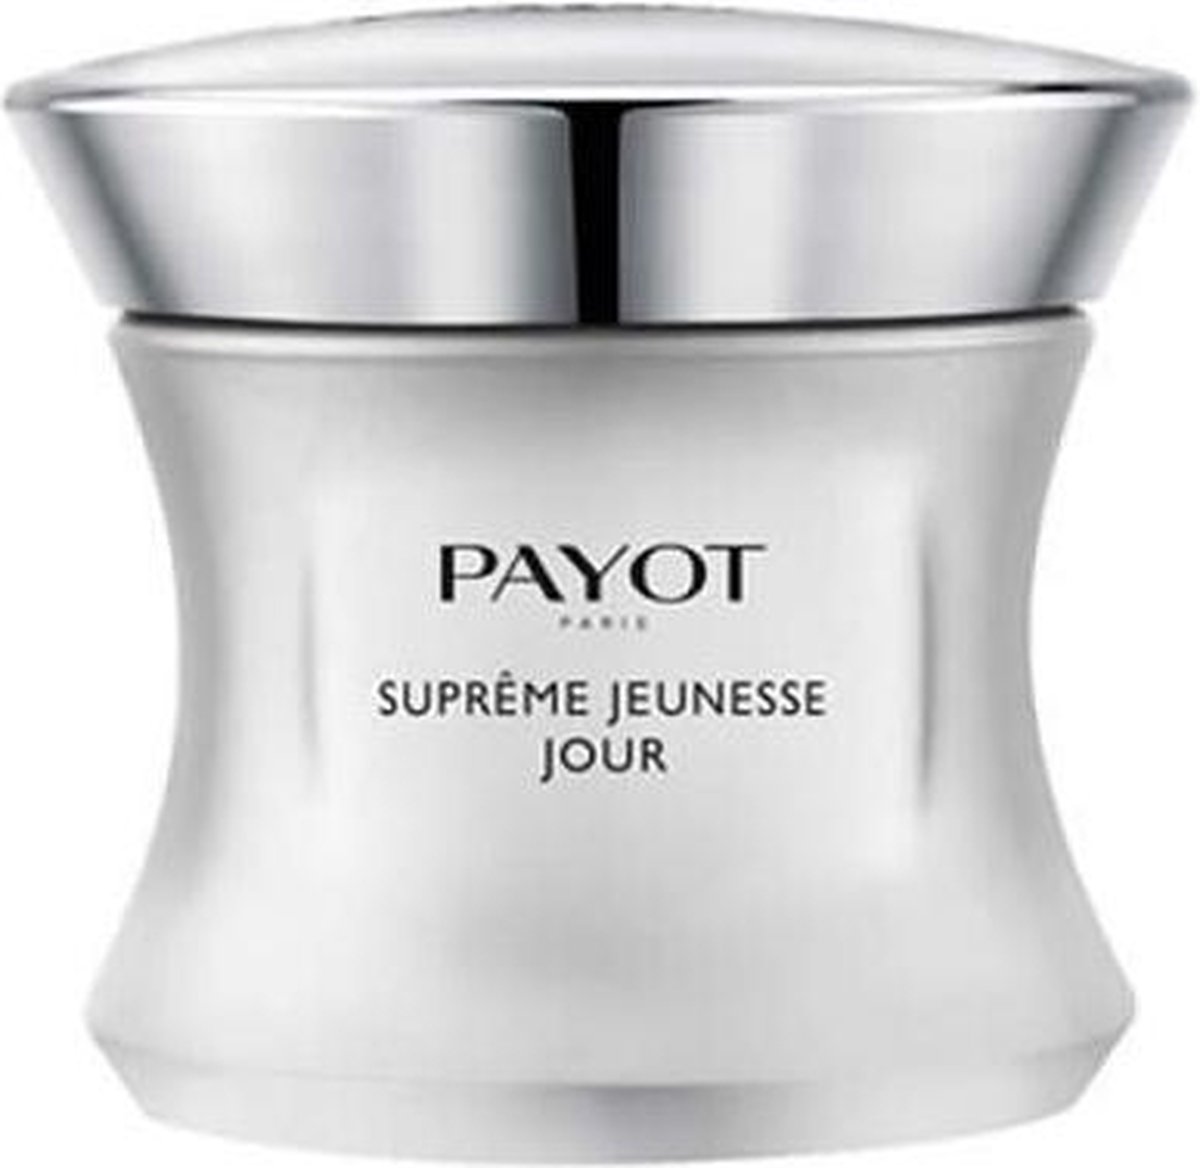 Payot Supreme Jeunesse Le Jour Day Cream 50 Ml For Women